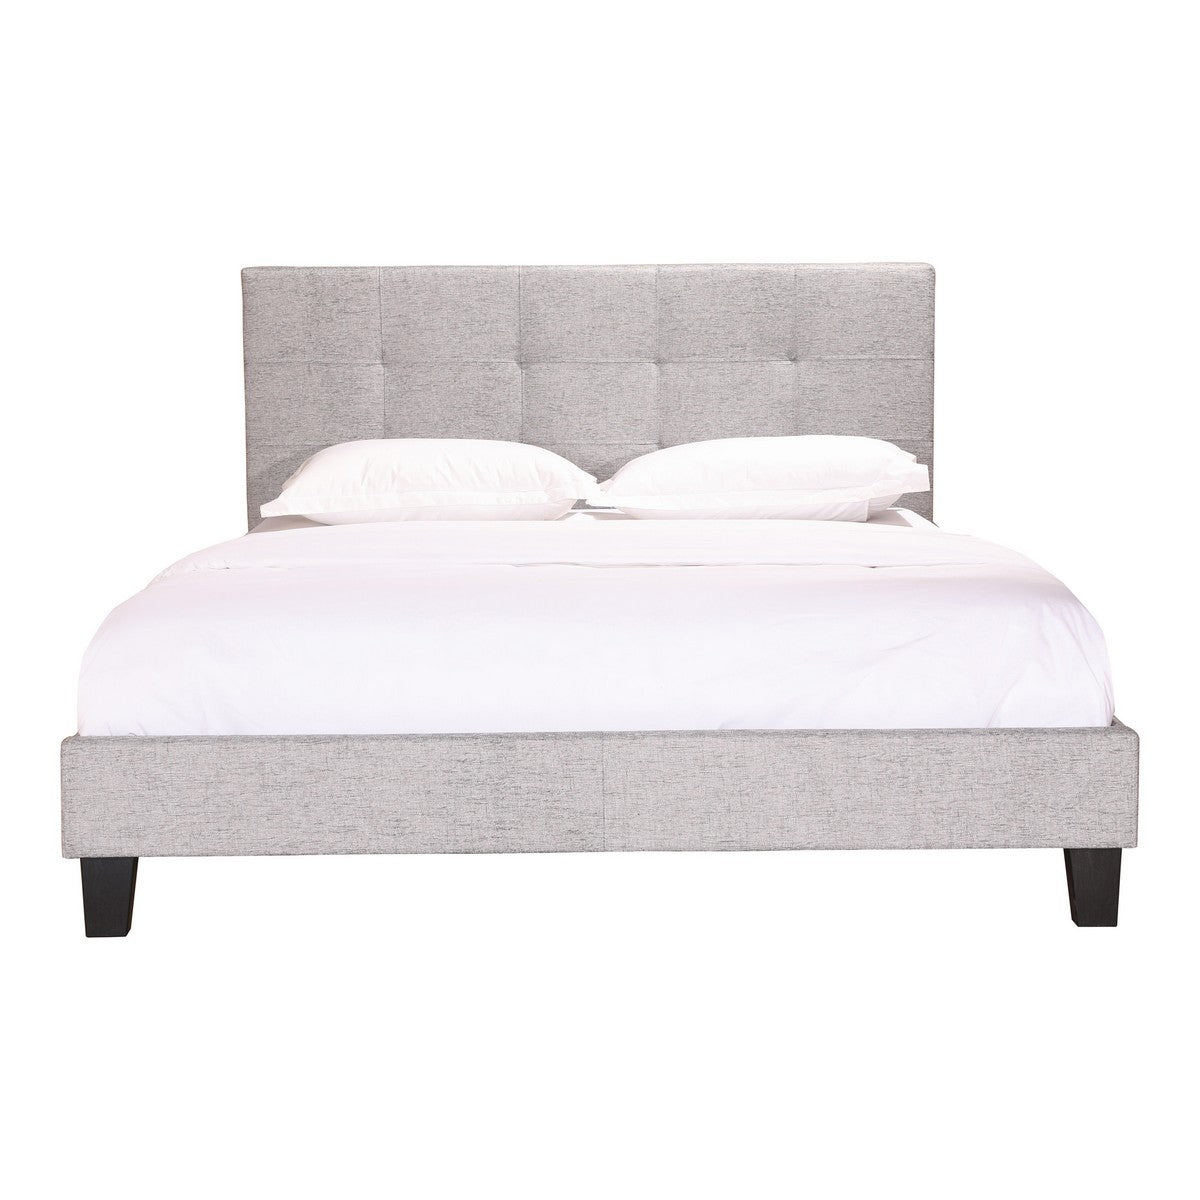 Moe's Home Collection Eliza Queen Bed Light Grey Fabric - RN-1020-29 - Moe's Home Collection - Beds - Minimal And Modern - 1